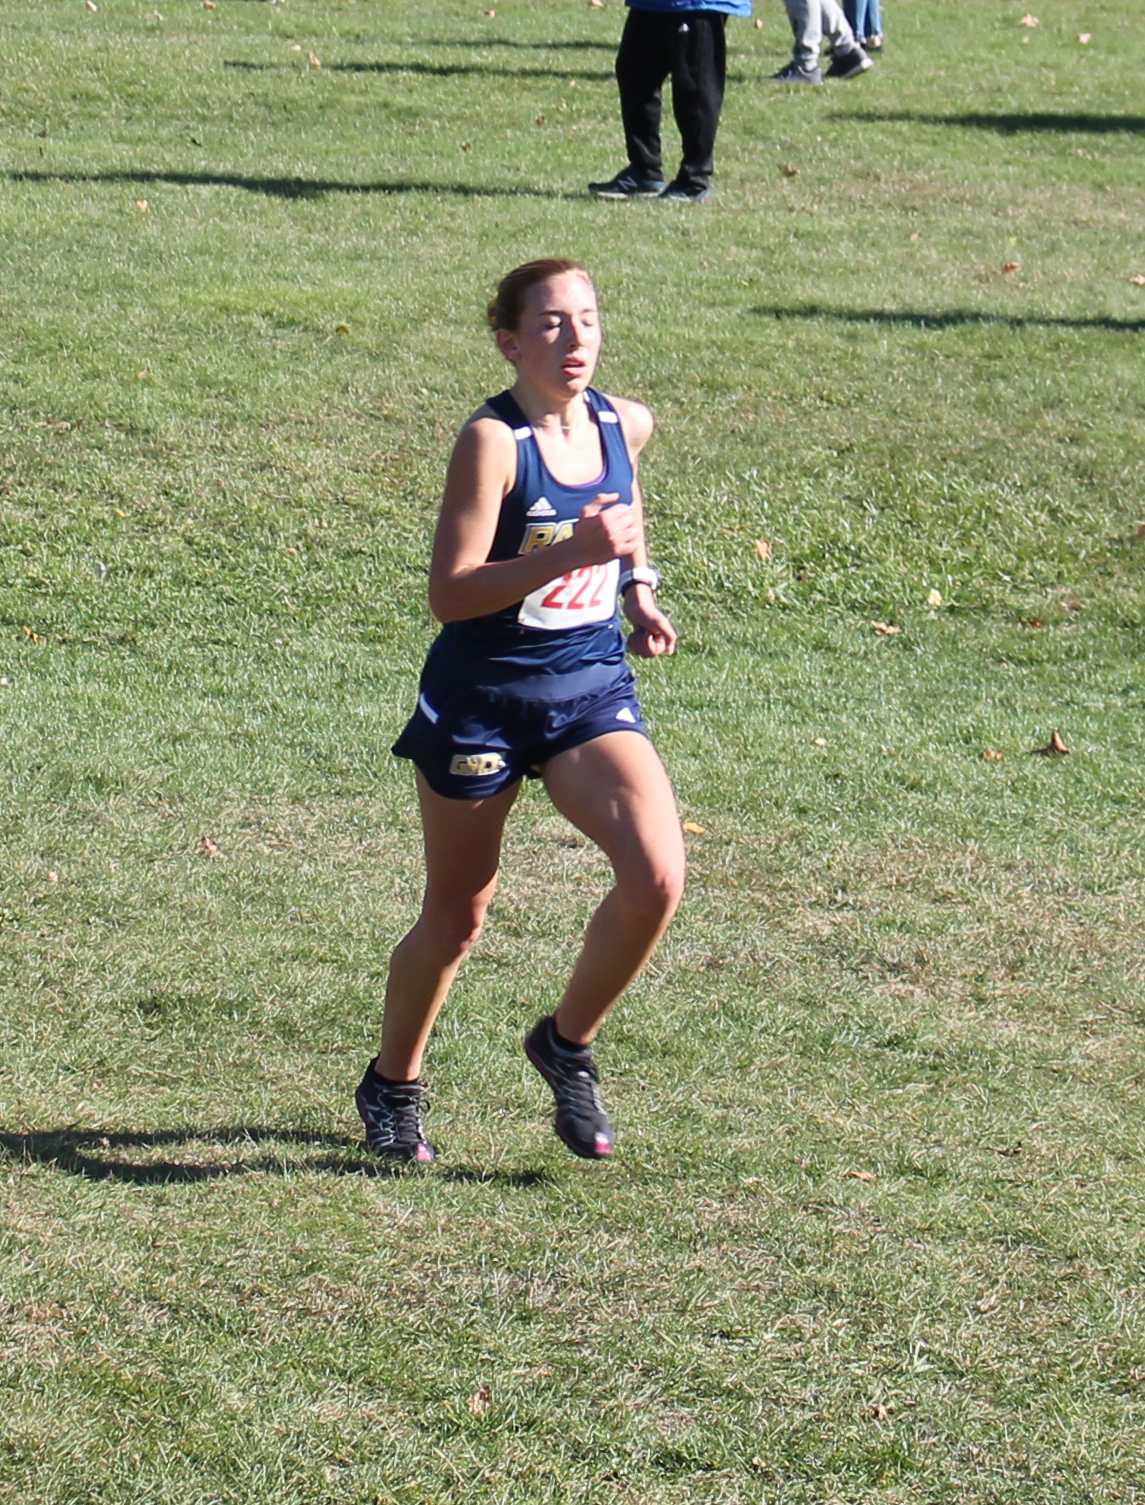 Grand Rapids' Audrey Meyering cruises to victory at the MCCAA women's cross country championship